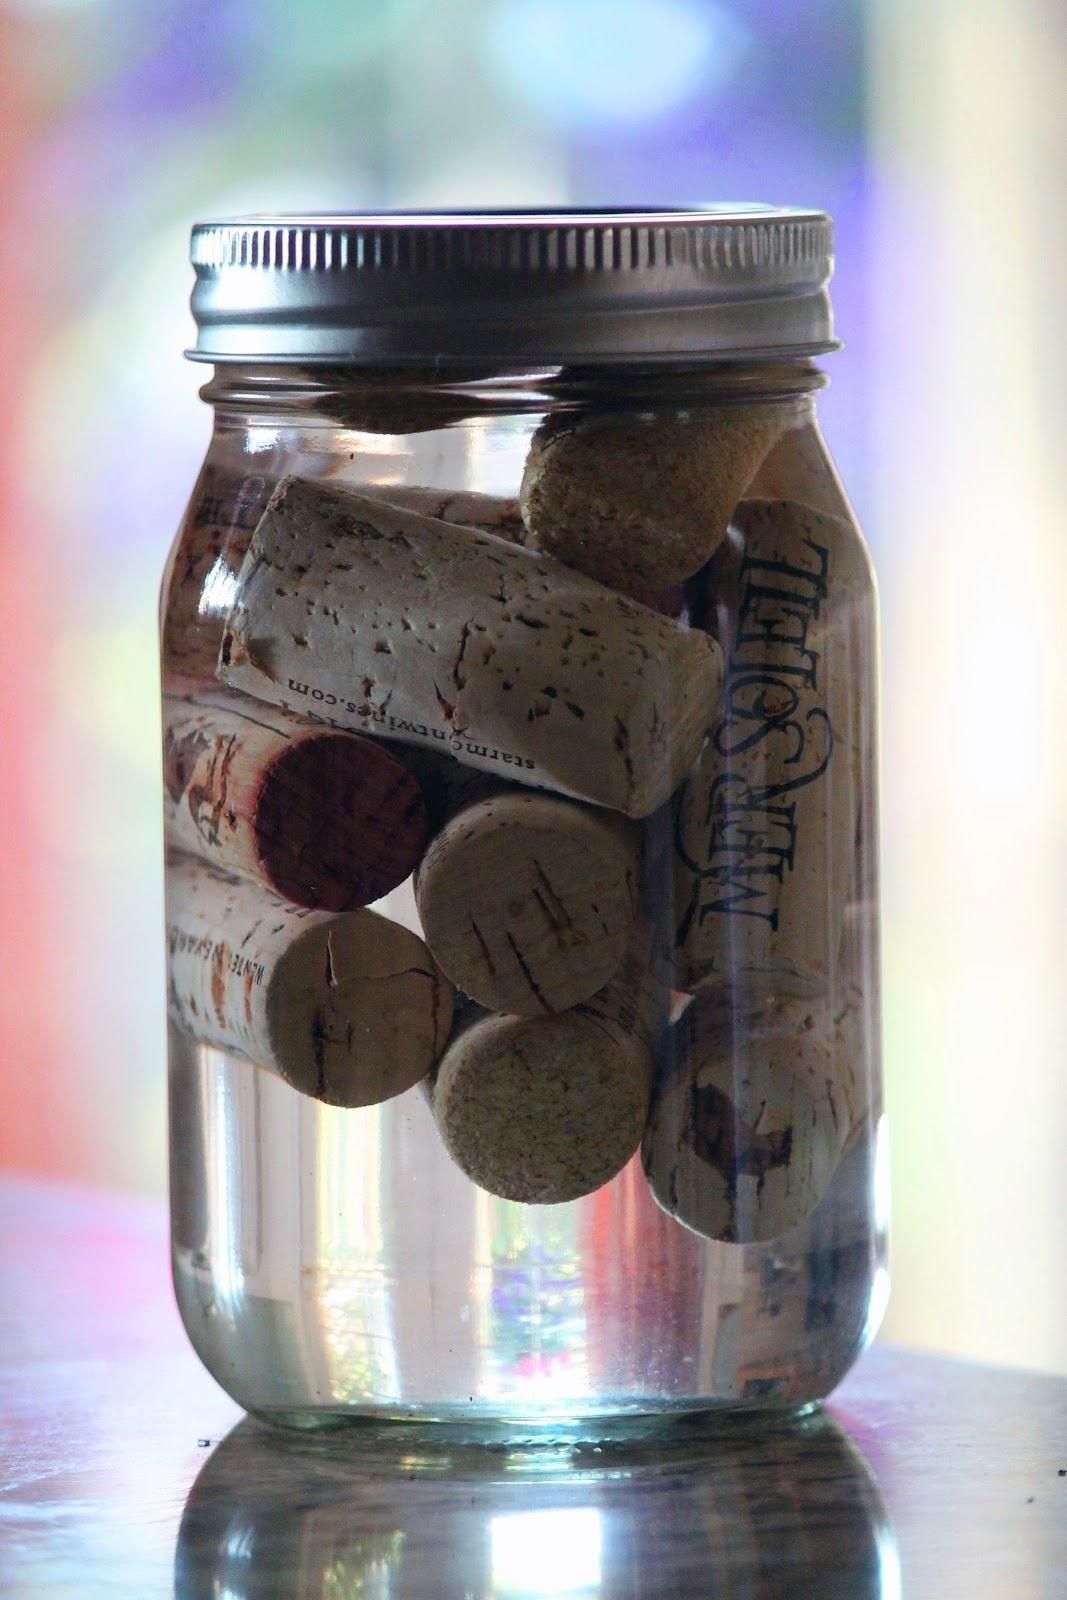 For the outdoor adventurer, perhaps the most practical reuse for old wine corks are fire starters. Just soak your cork stoppers in a jar of alcohol before you head out on your next camping trip and